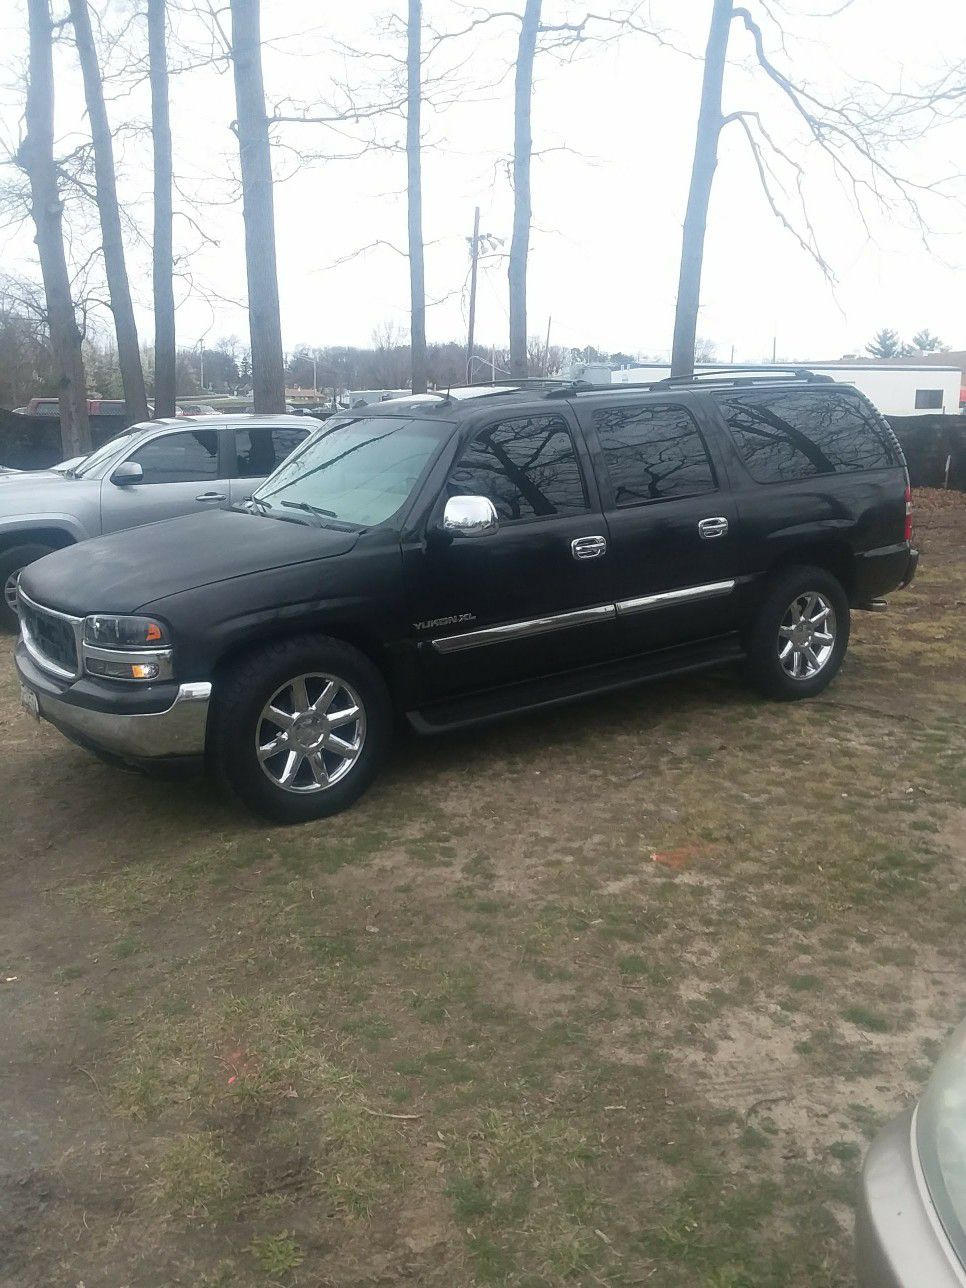 20 inch autehntic GMC rims and brand new tires